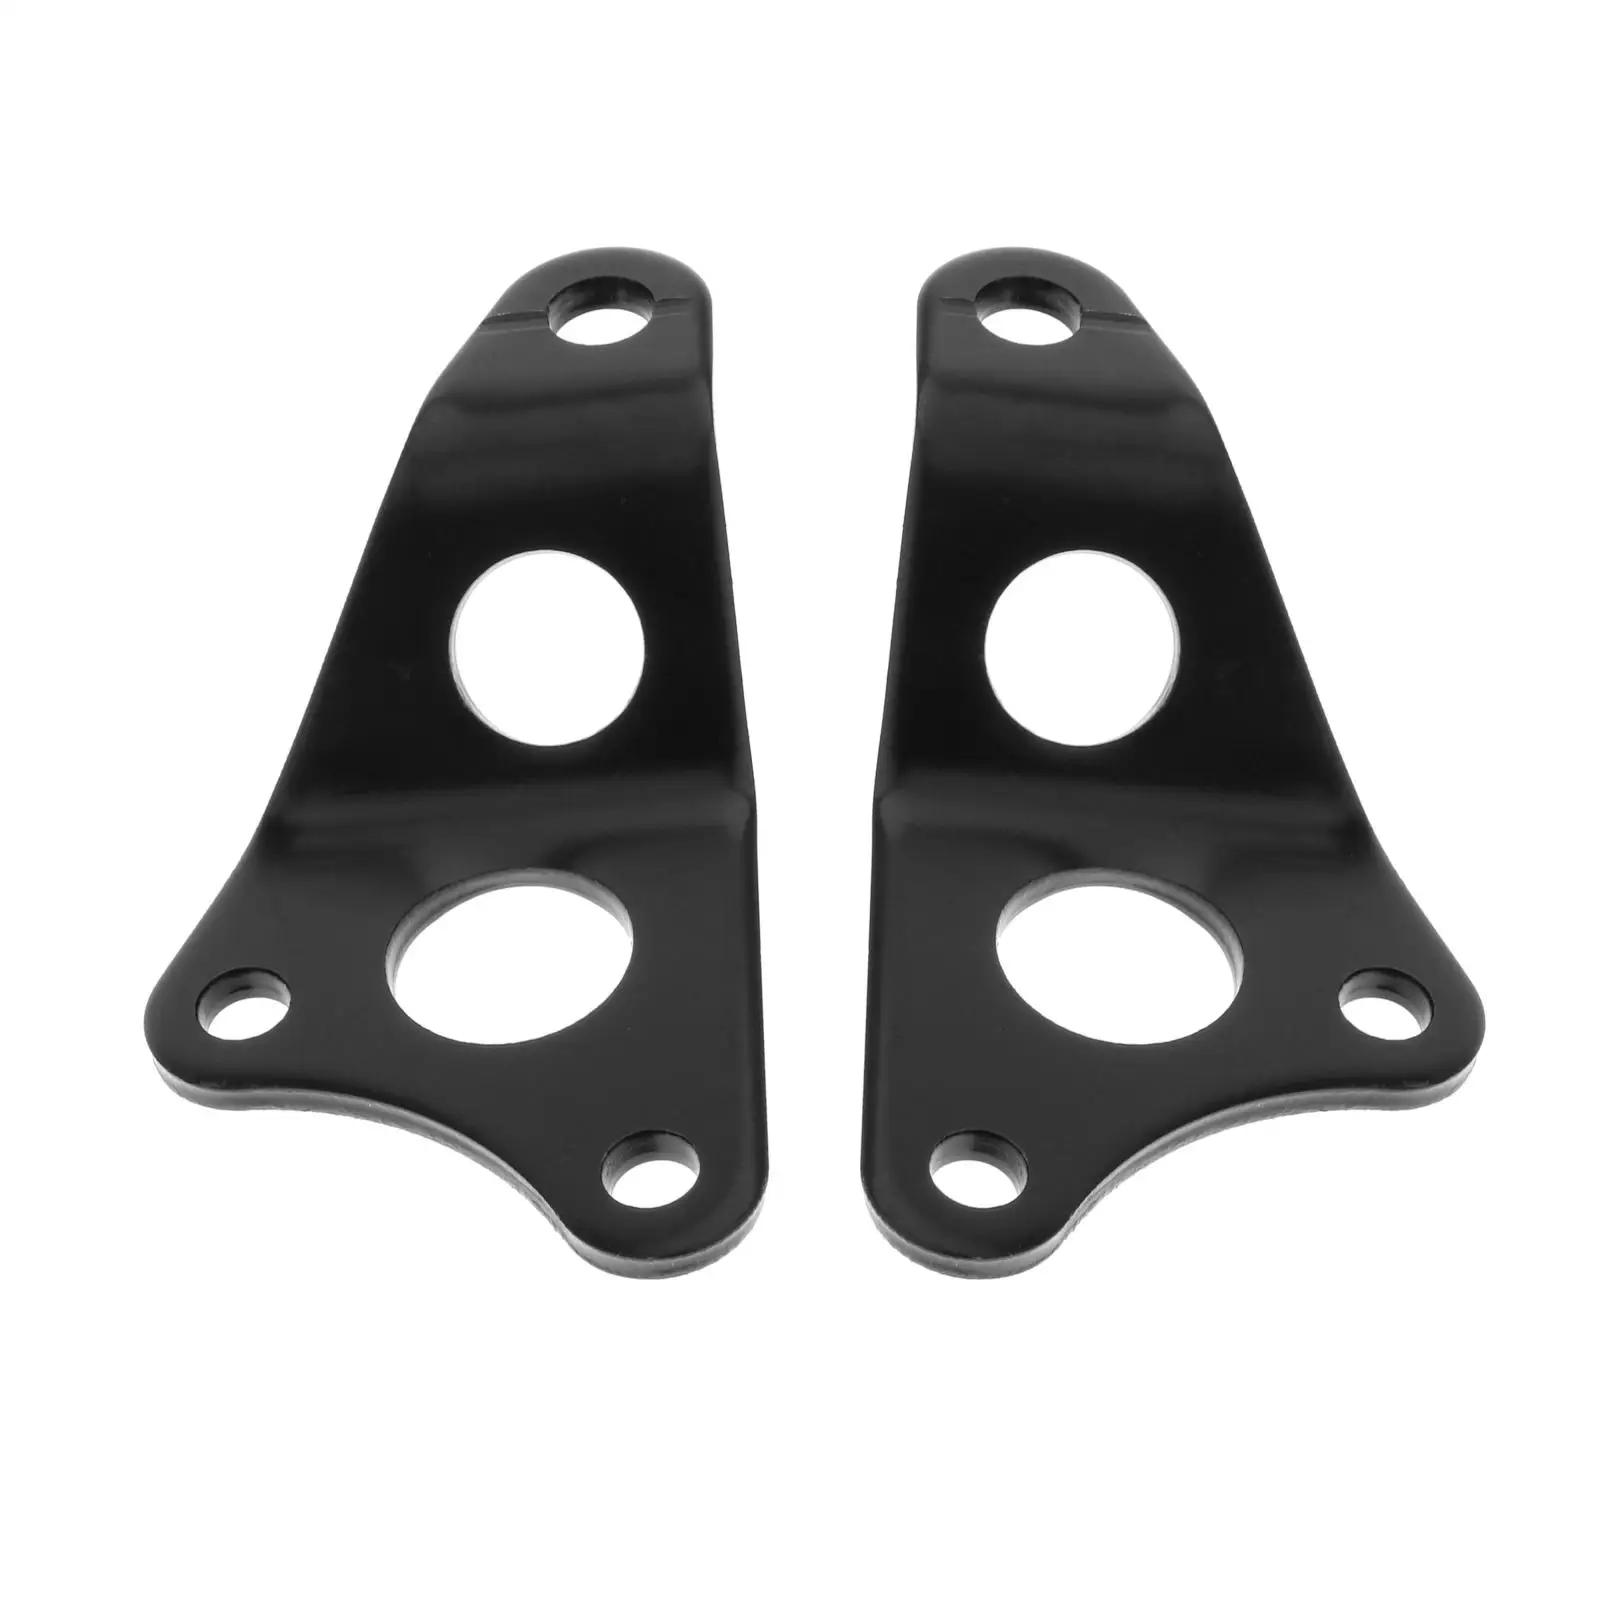 Front Motor Engine Mounts Stays For Yamaha YFZ450 YFZ 450 2004-2013 5D3-21316-01-00 5D3-21317-01-00 Replacement 2x